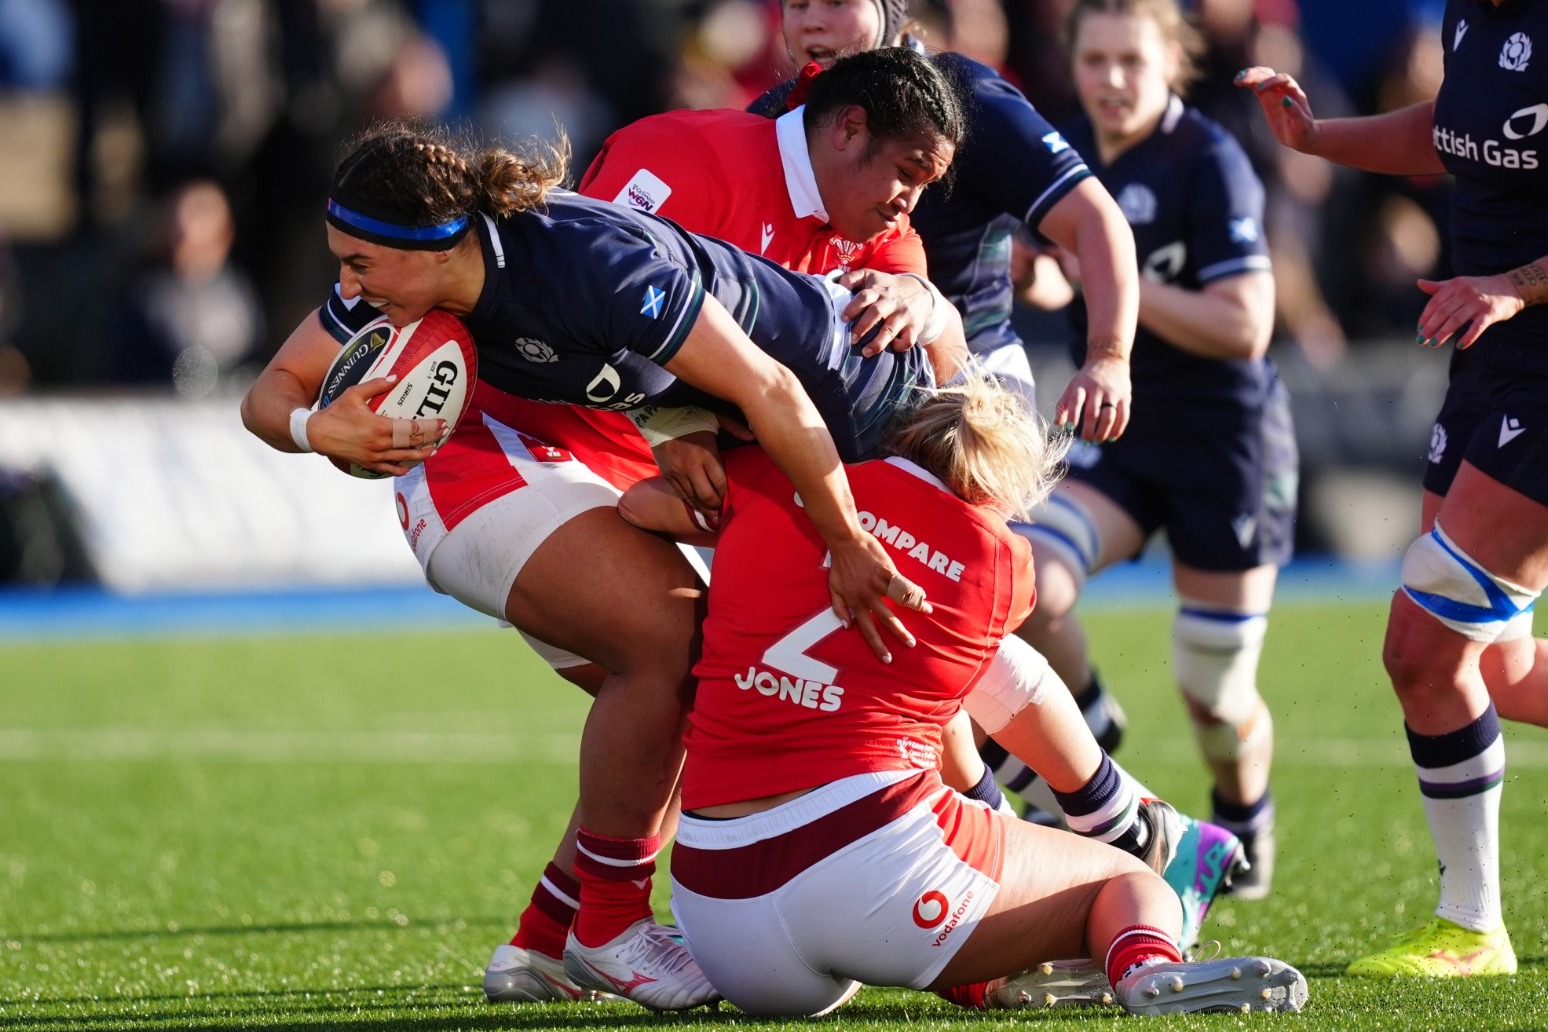 Scotland hold on for first away win over Wales since 2004